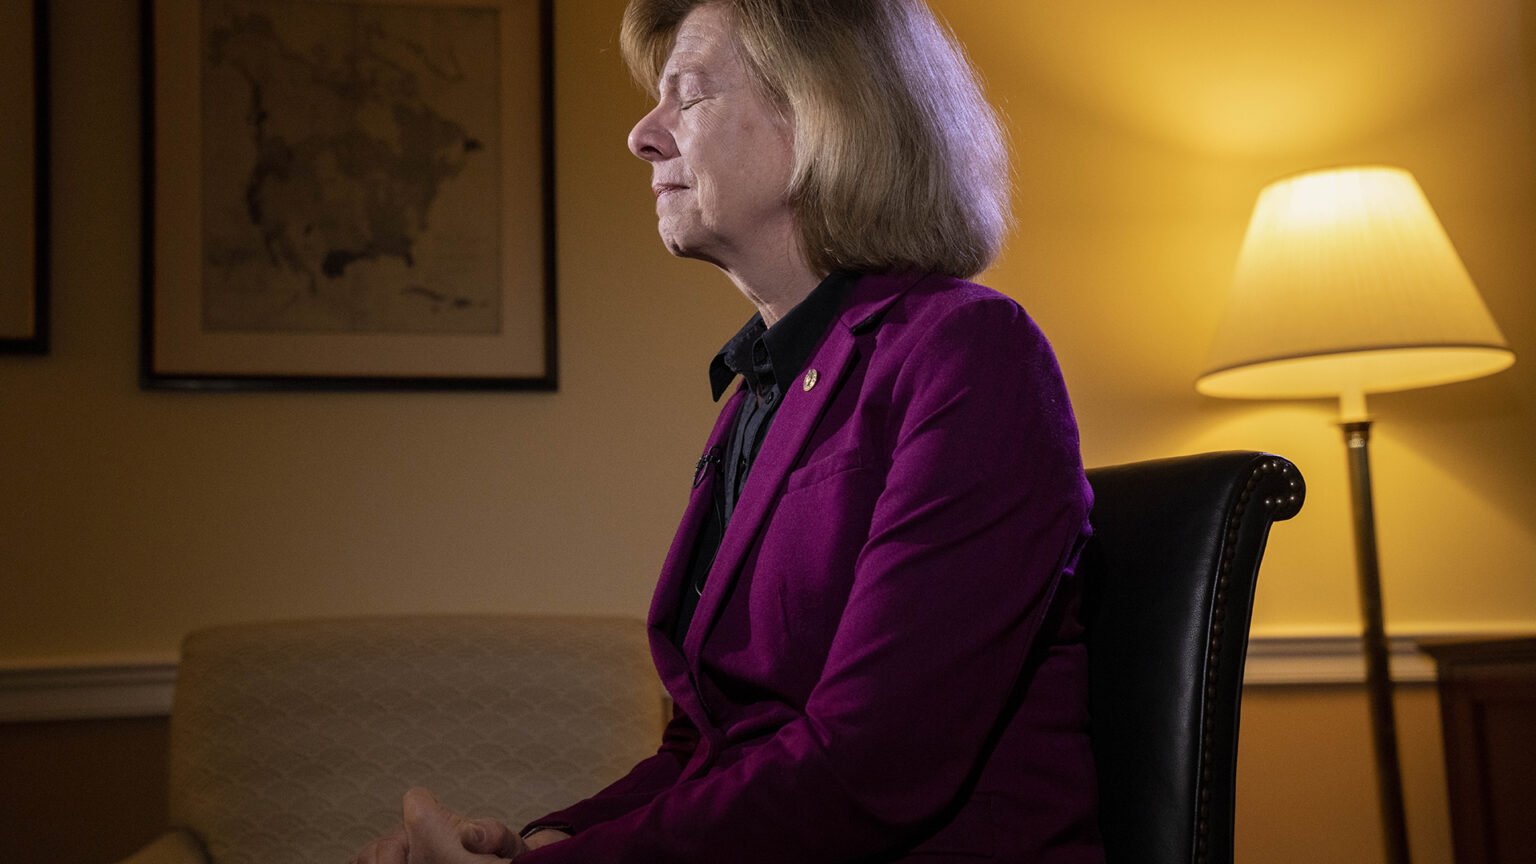 Tammy Baldwin sits in a chair in an office with her eyes closed and hands folded in her lap, with a lit lamp and vintage map of North America in the background.